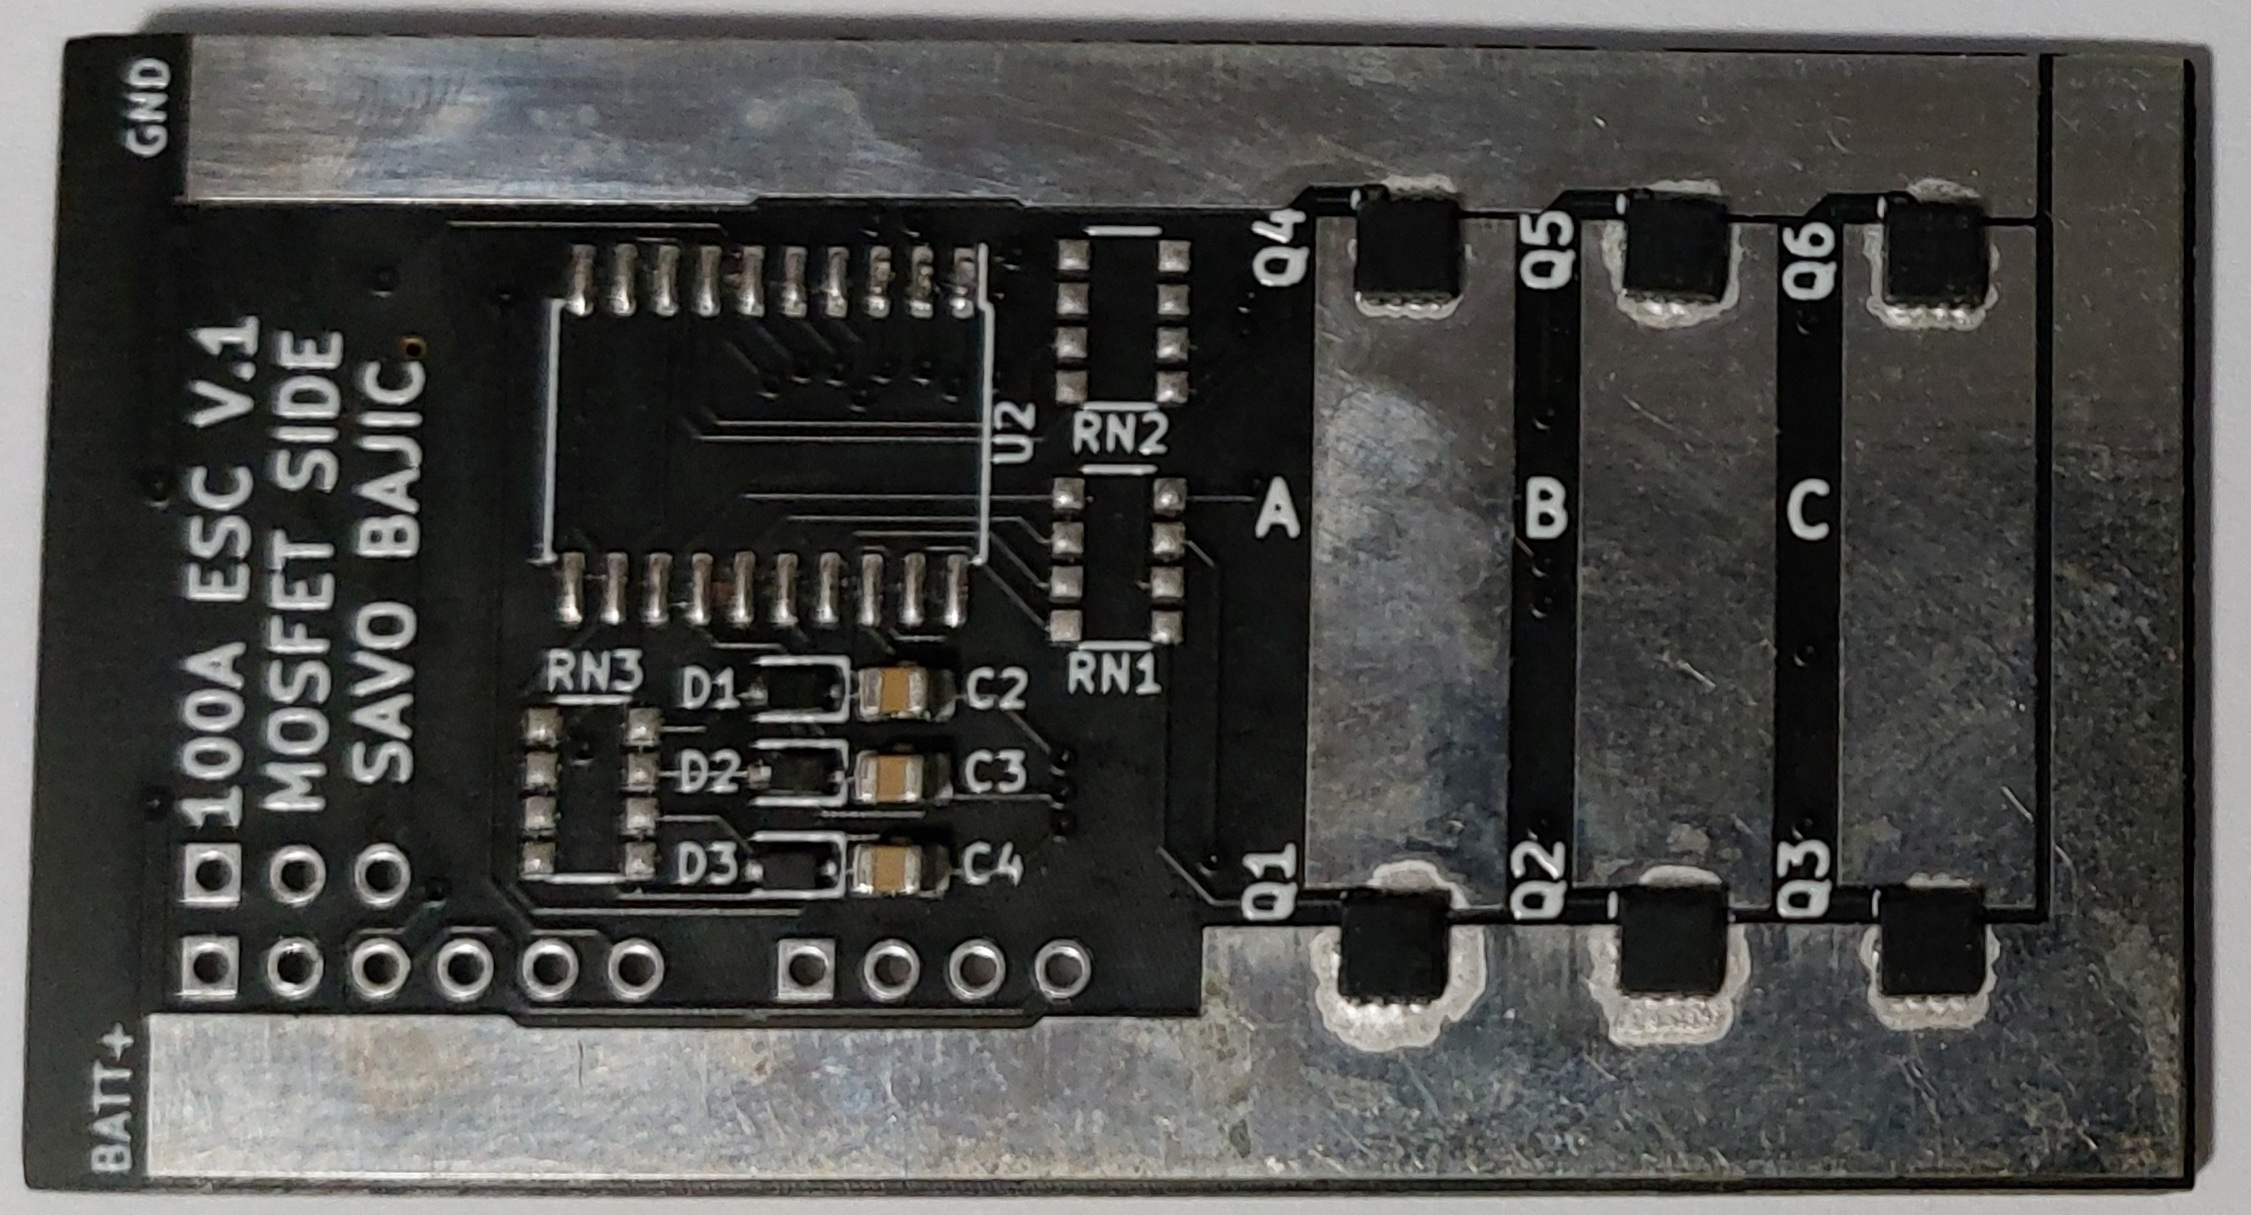 The assembled MOSFET/Inverter side (Note: I removed the MOSFET driver to use on other boards)